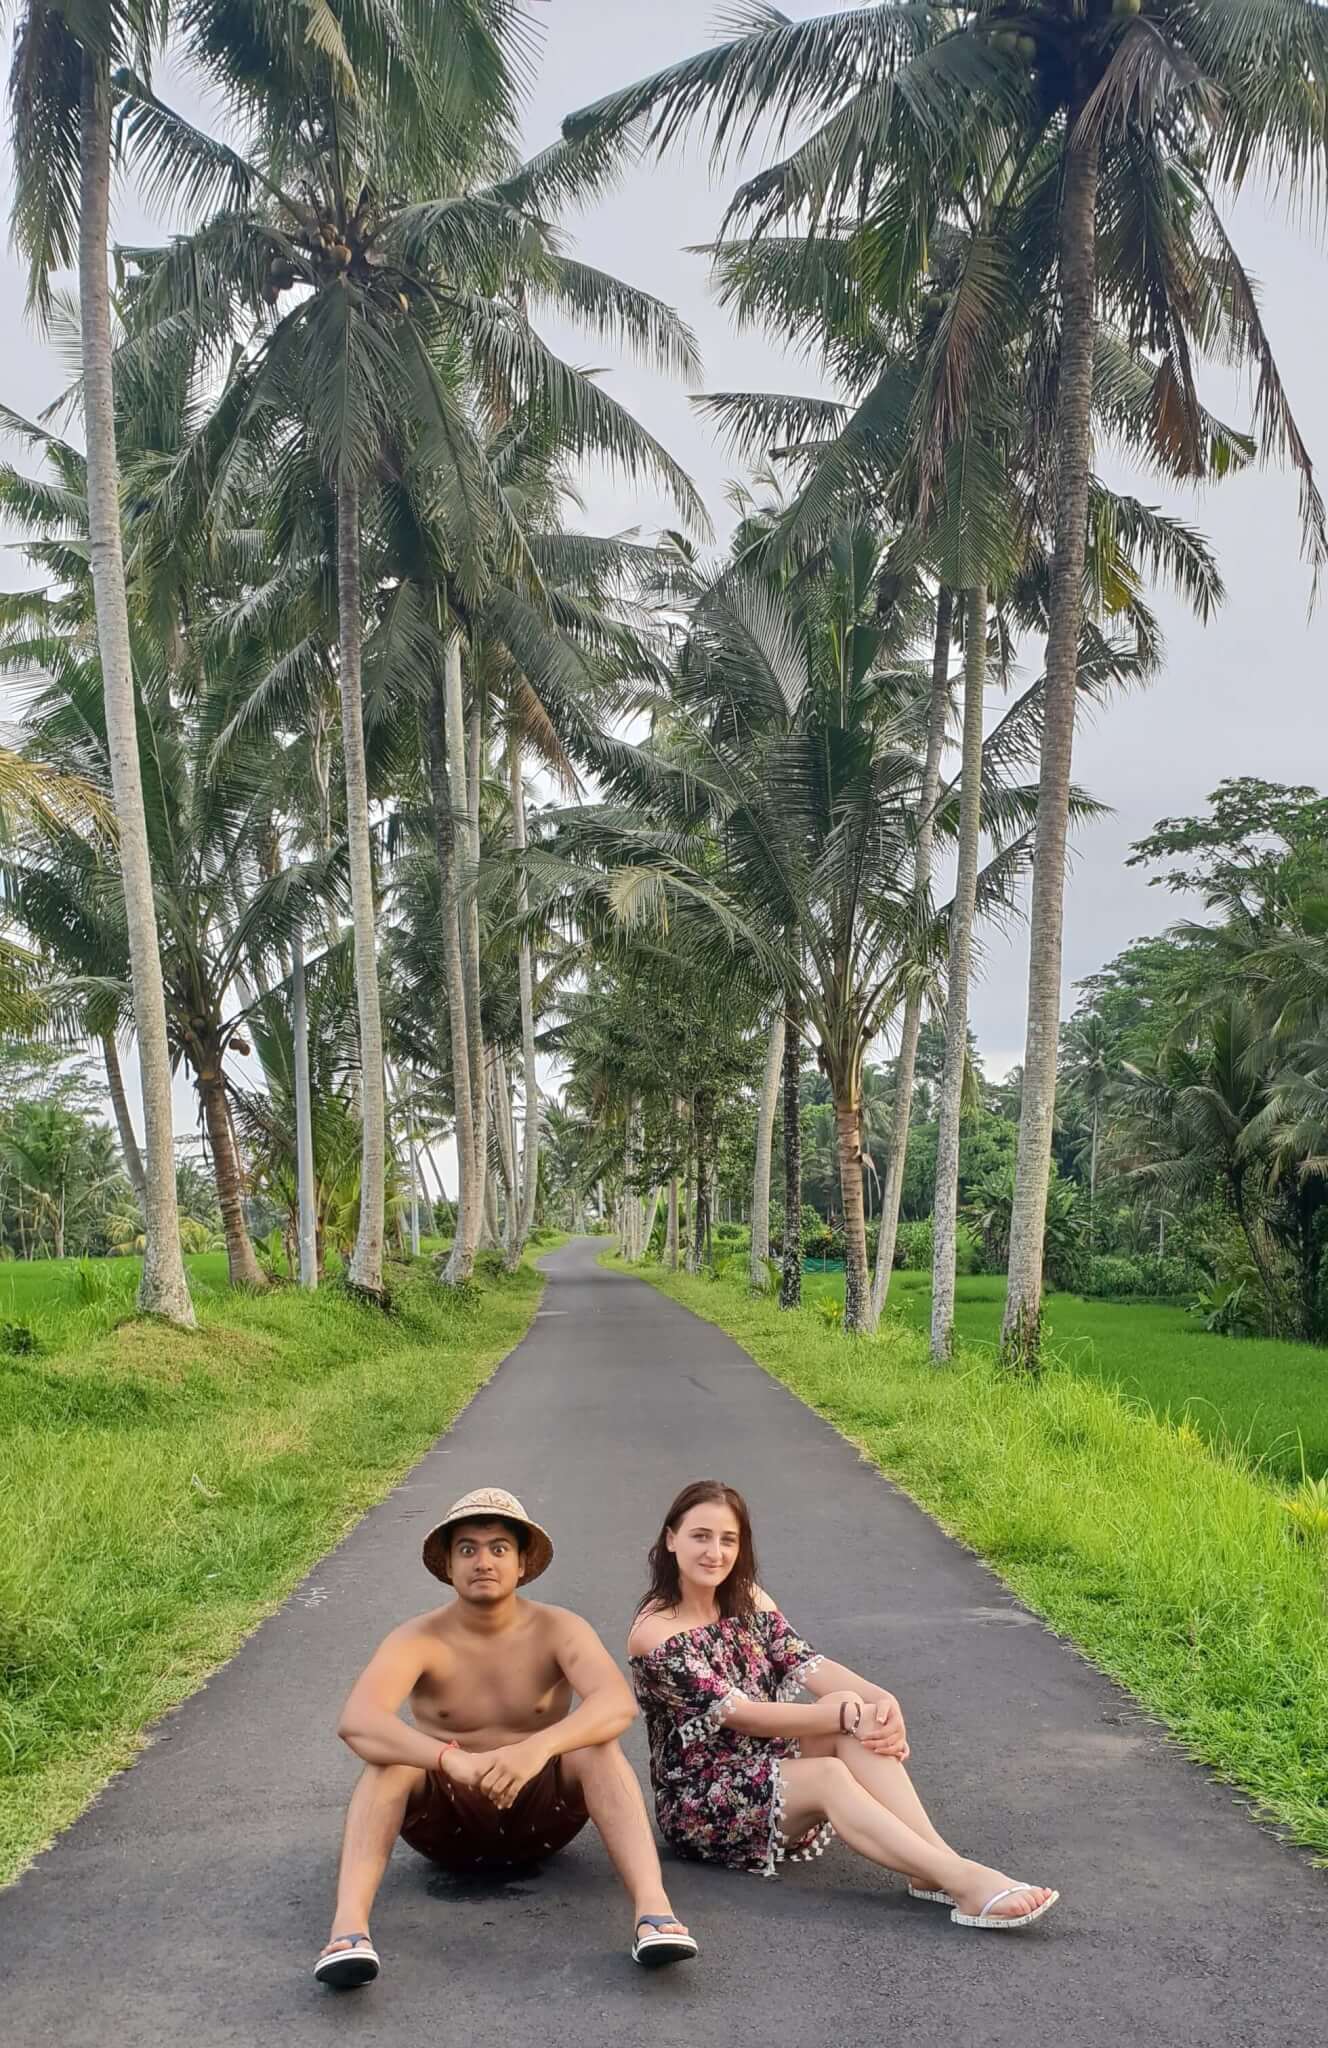 This Ubud itinerary will ensure that you fall in love with Ubud just like we did